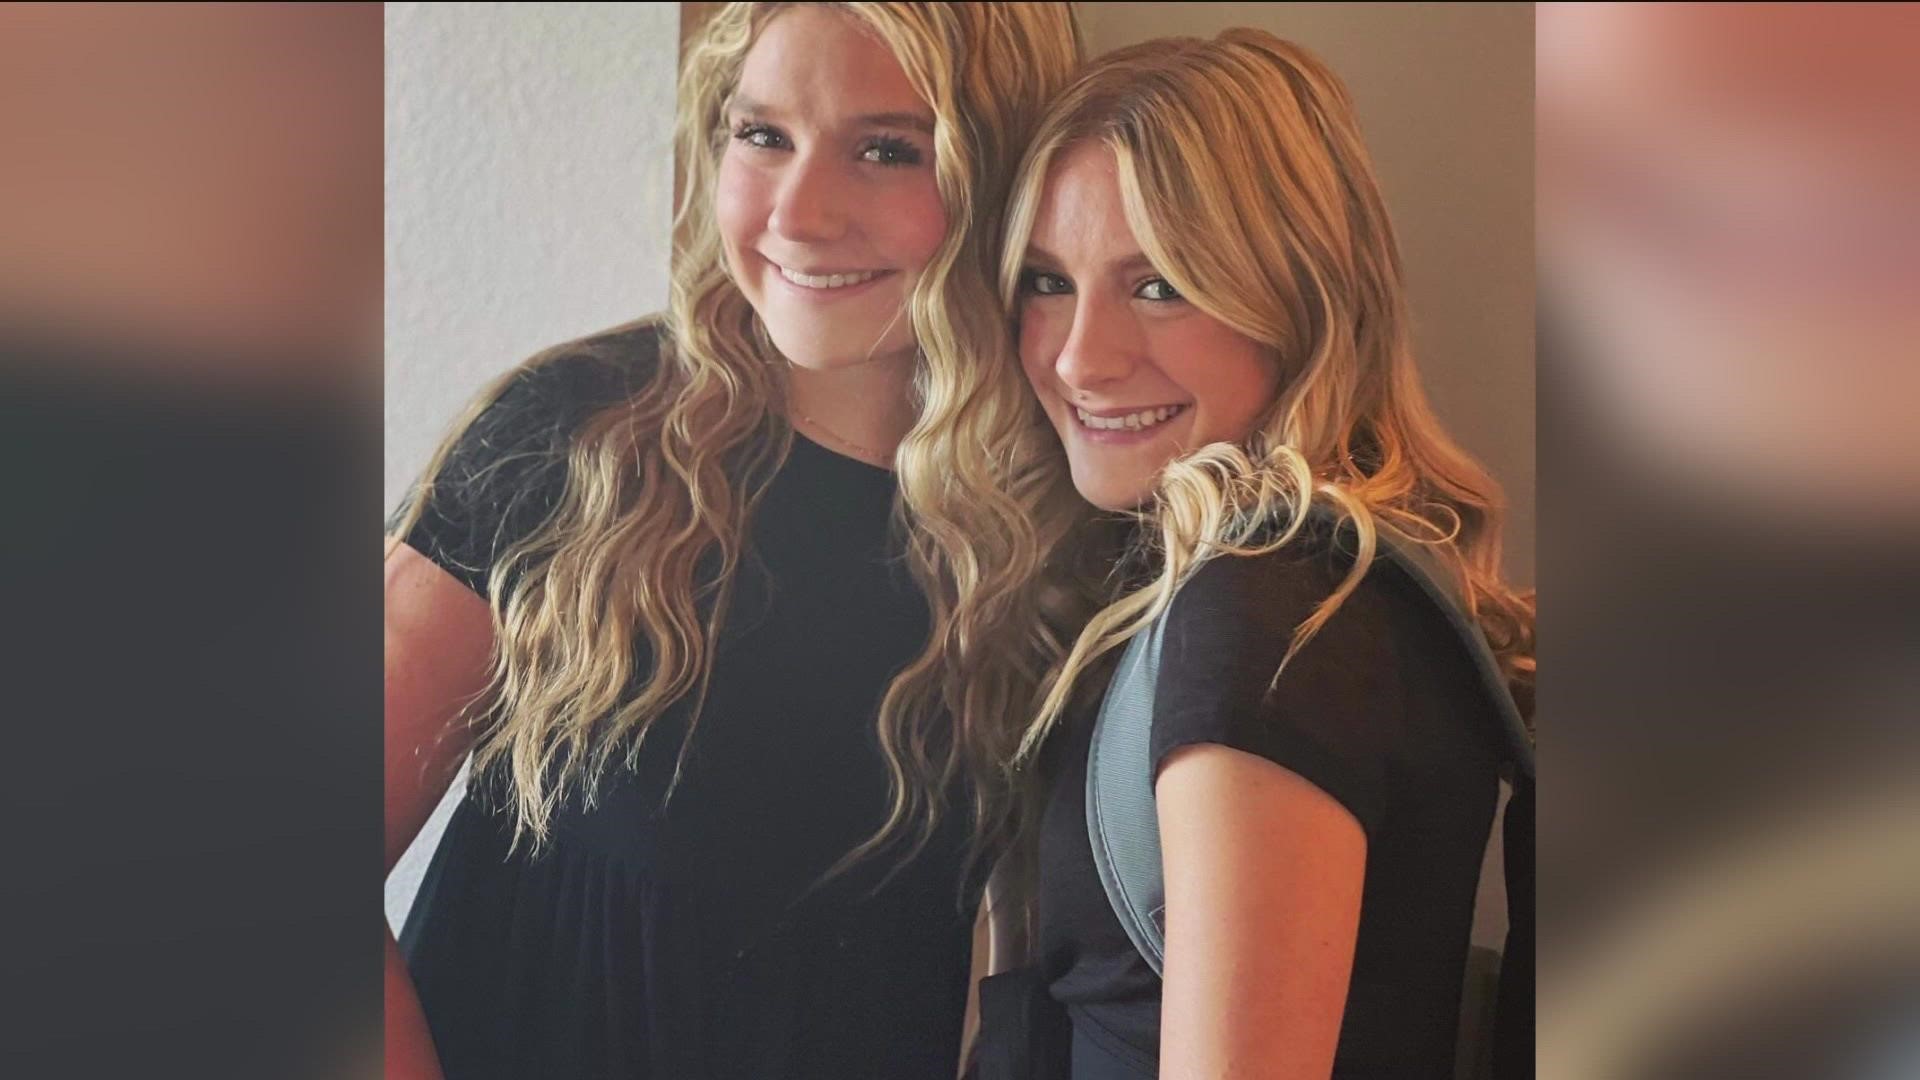 Emily and Kayla Schmidt were on the way to see friends Friday night when they struck an excavator that was parked on a foggy road. Kayla remains in ICU.